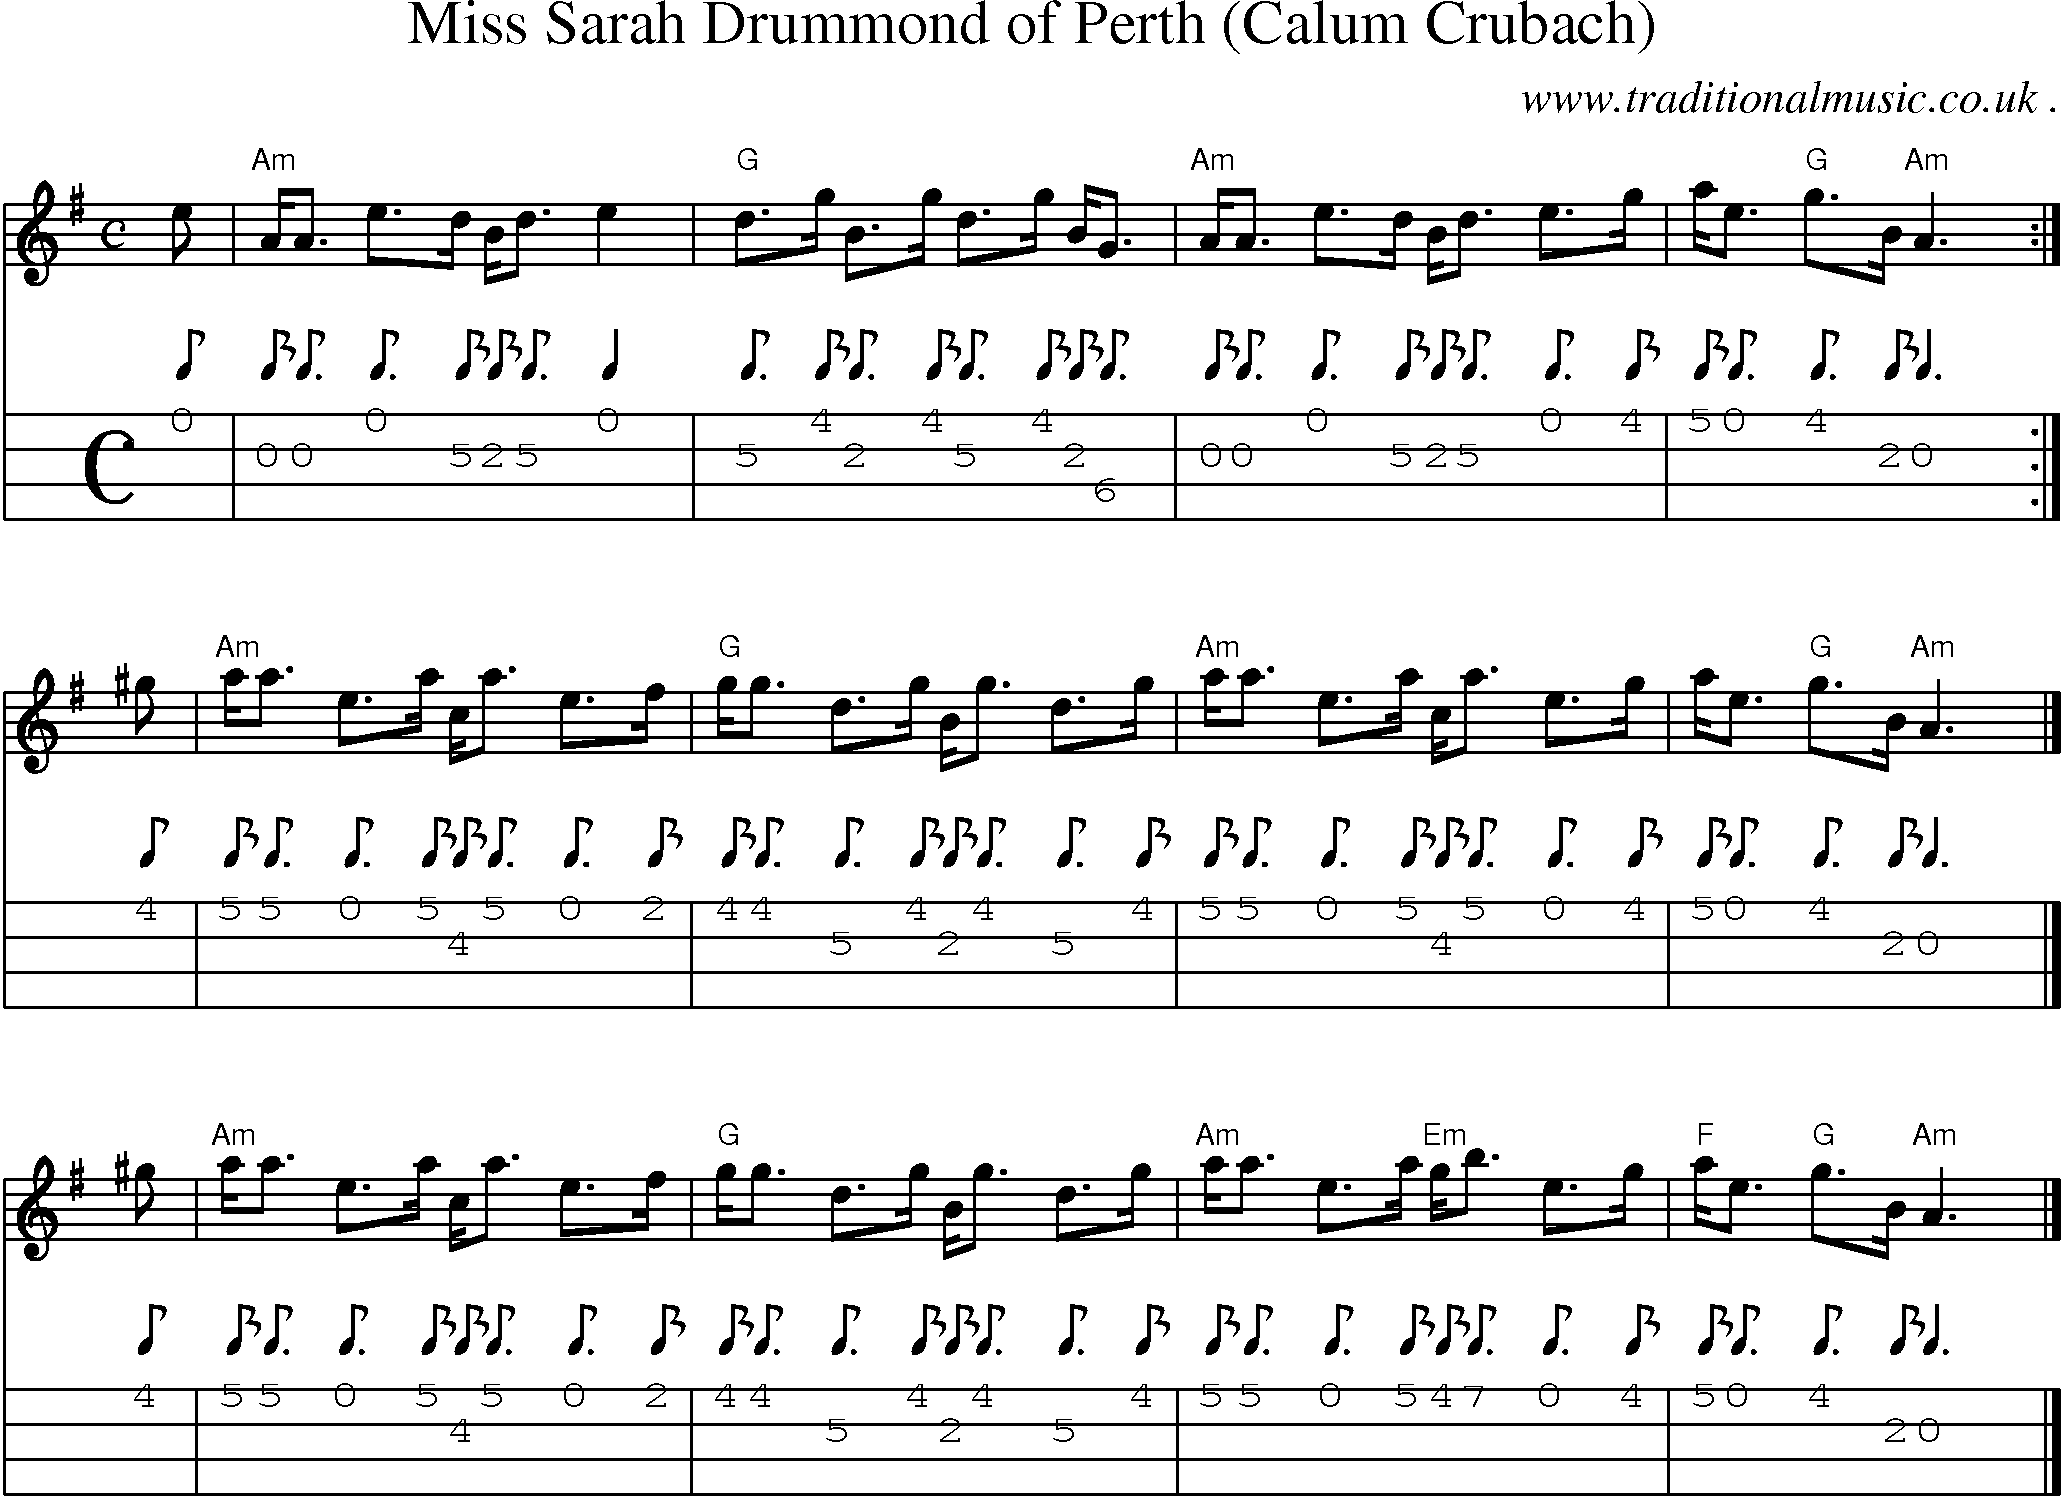 Sheet-music  score, Chords and Mandolin Tabs for Miss Sarah Drummond Of Perth Calum Crubach